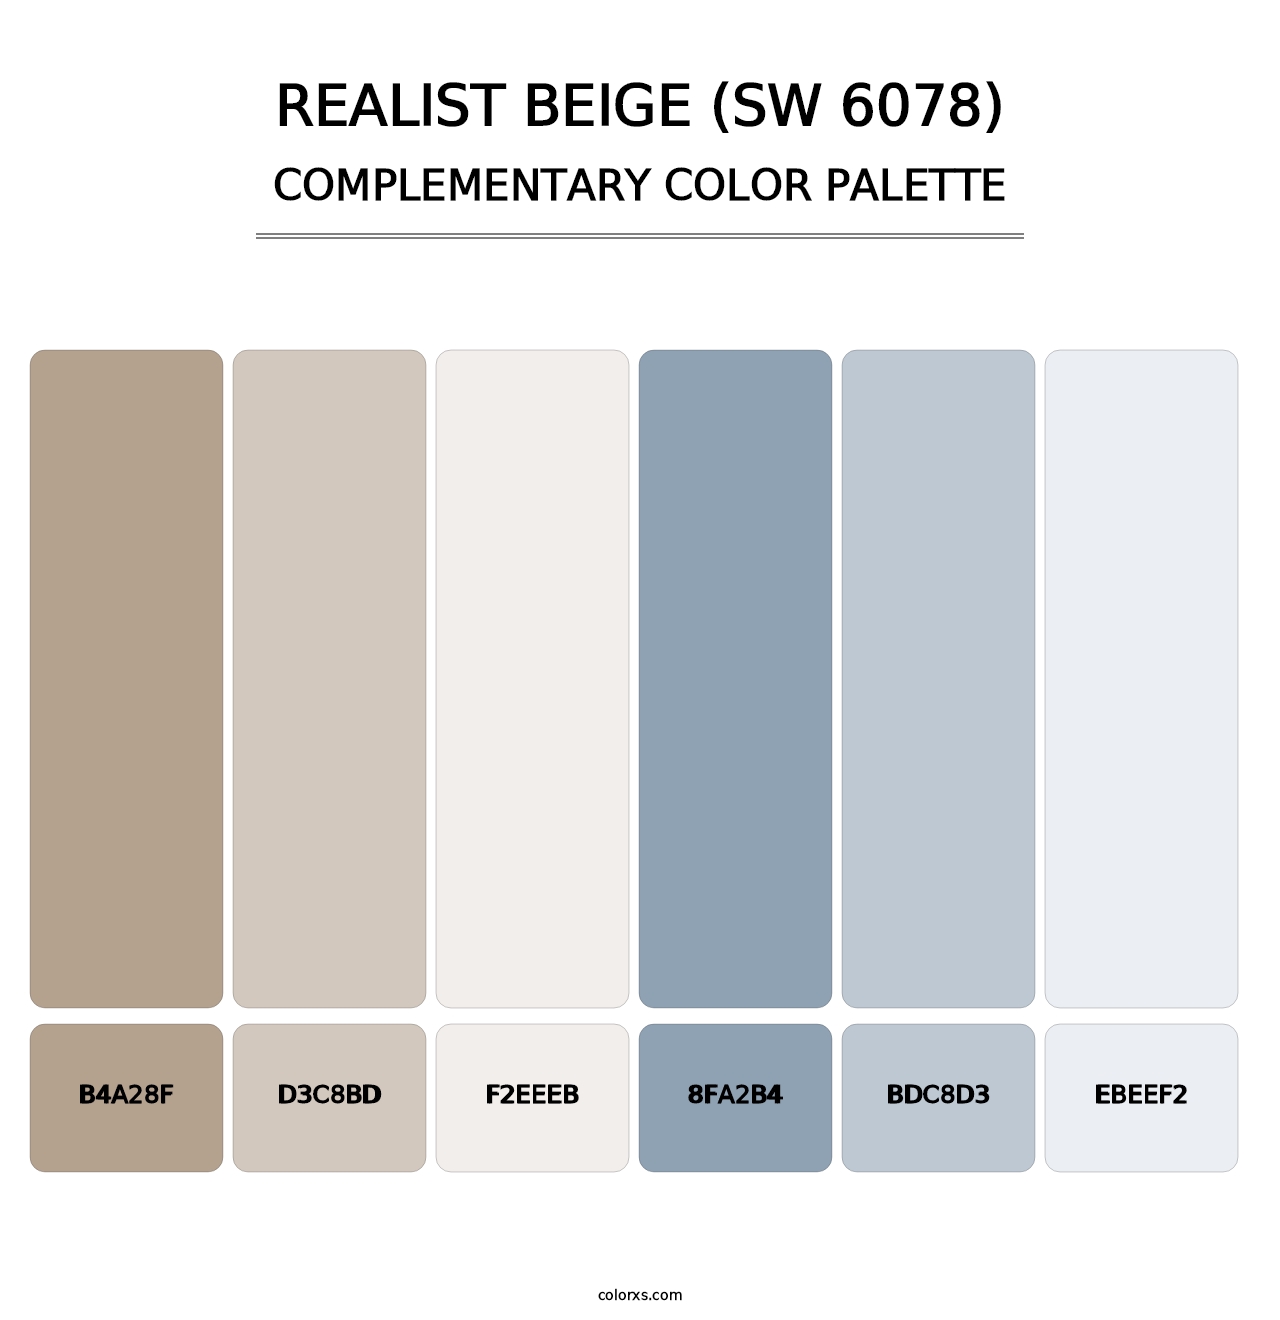 Realist Beige (SW 6078) - Complementary Color Palette